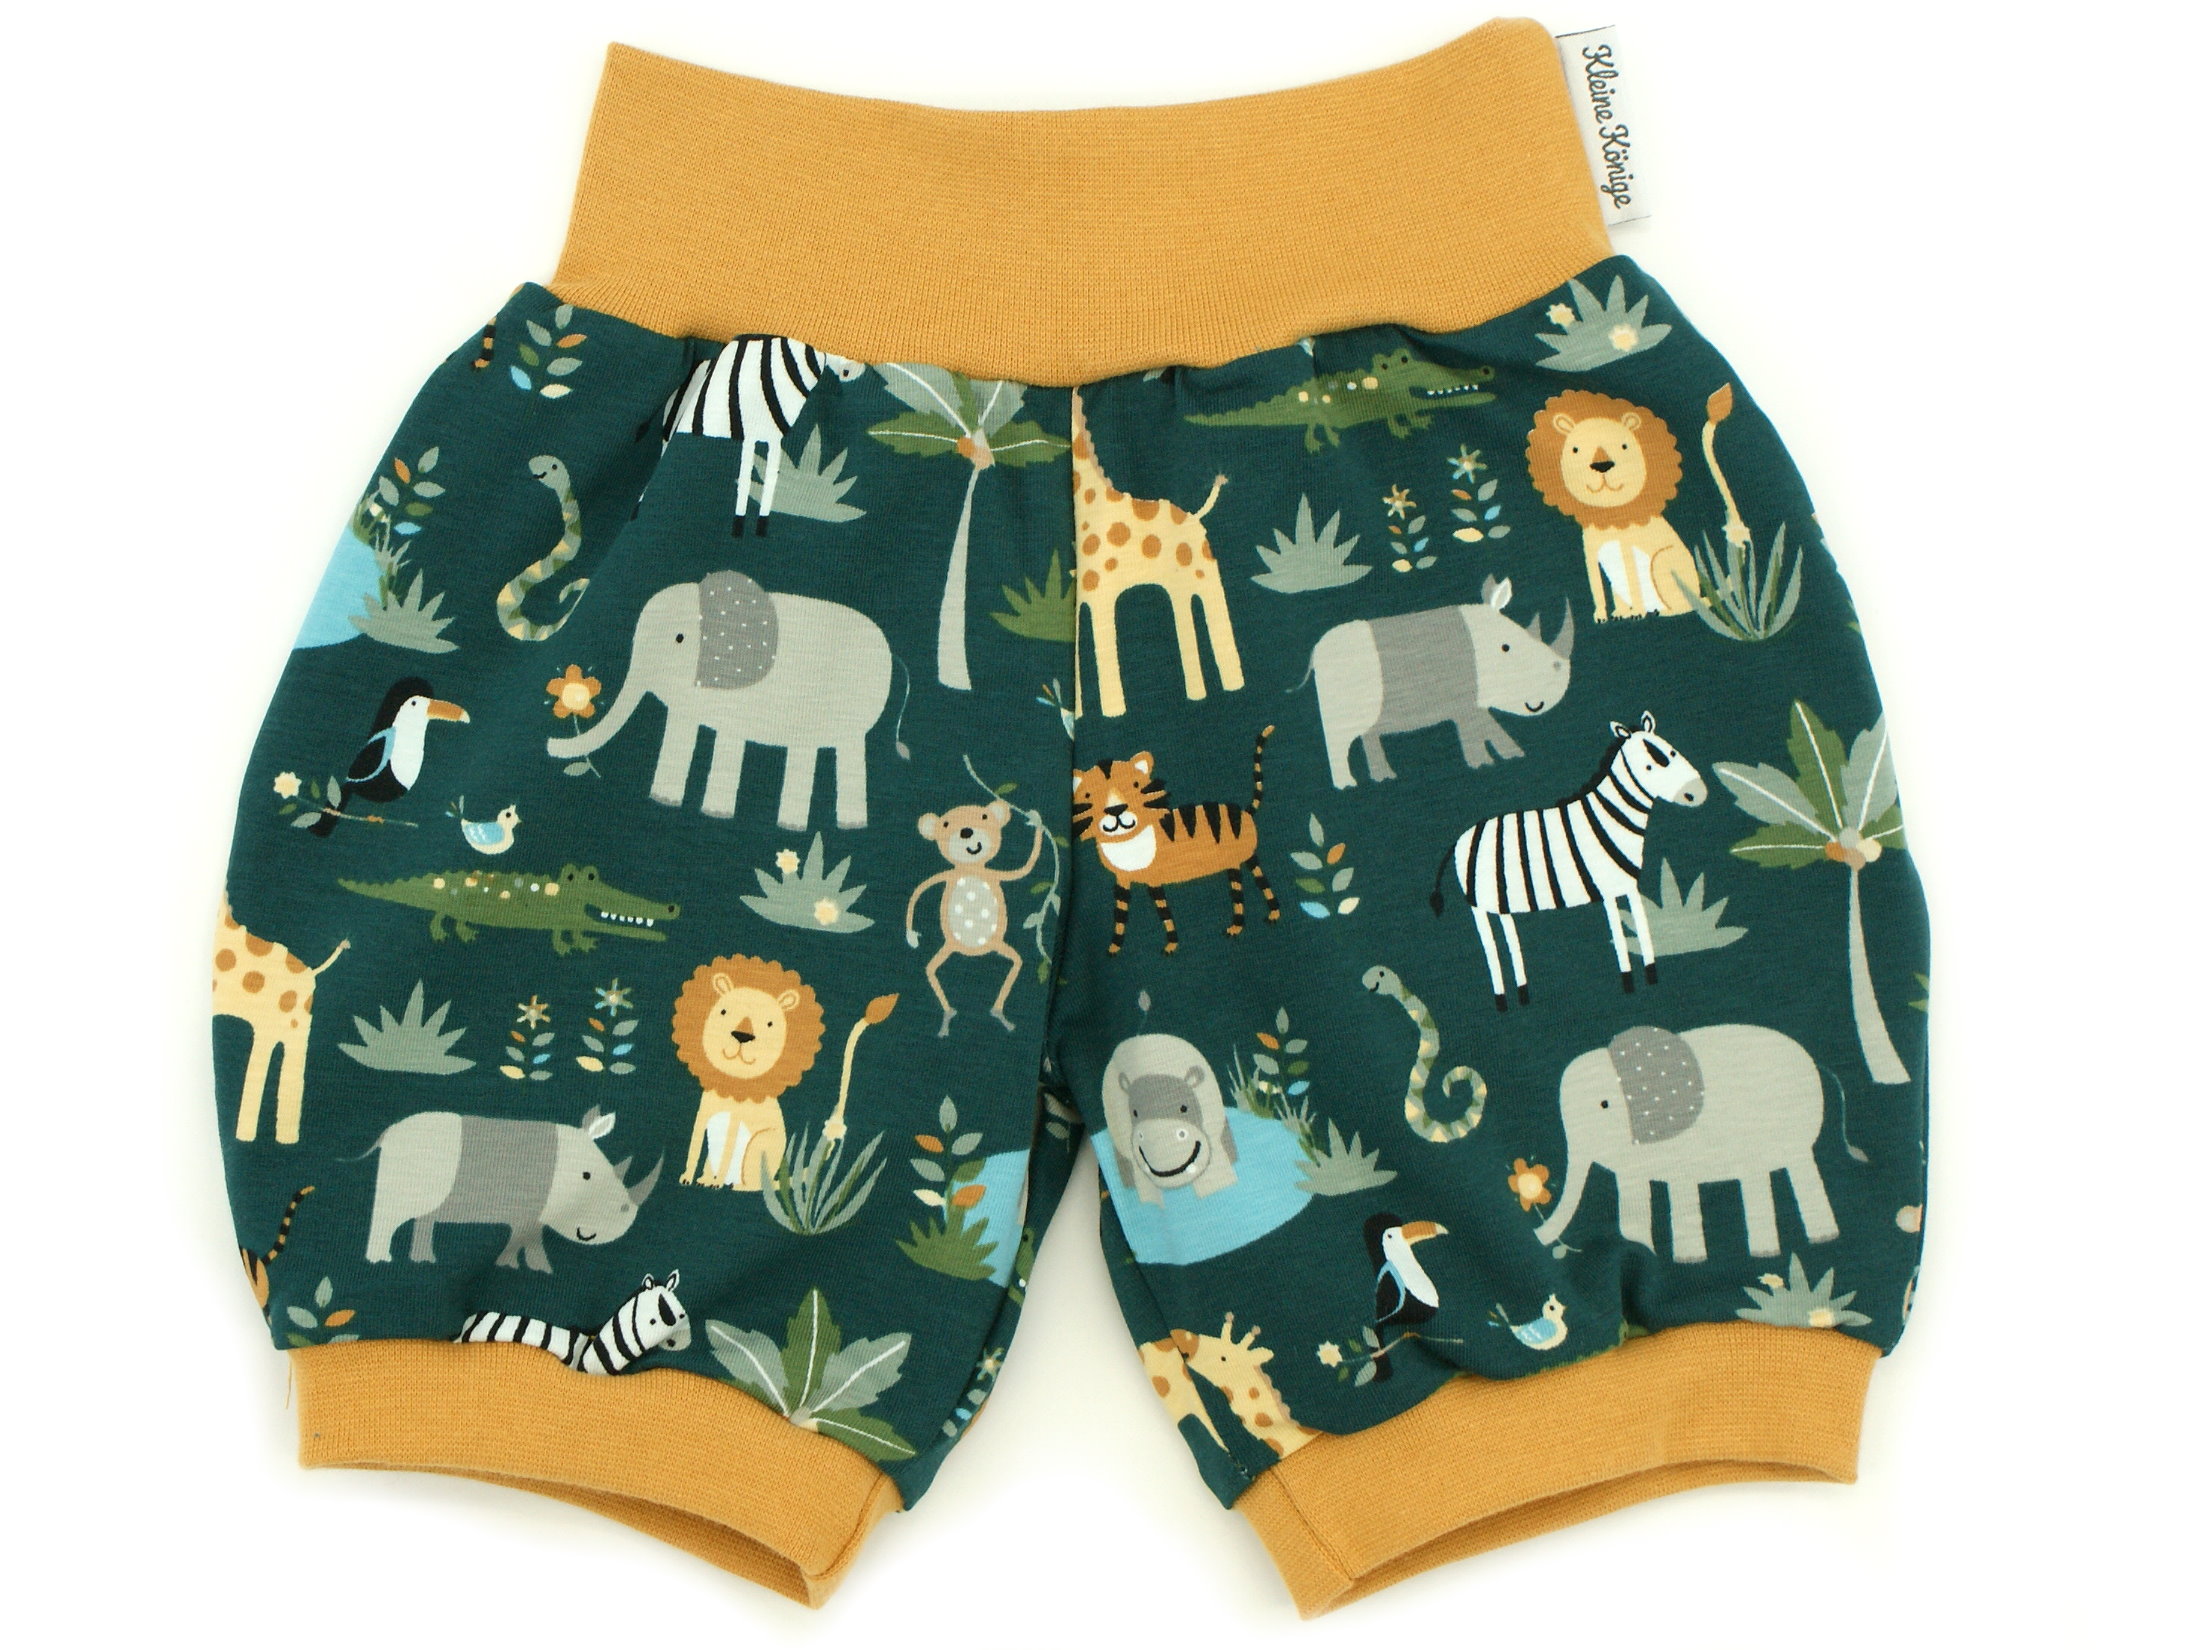 Kinder Sommer Shorts Dschungeltiere "Zooparty" petrol